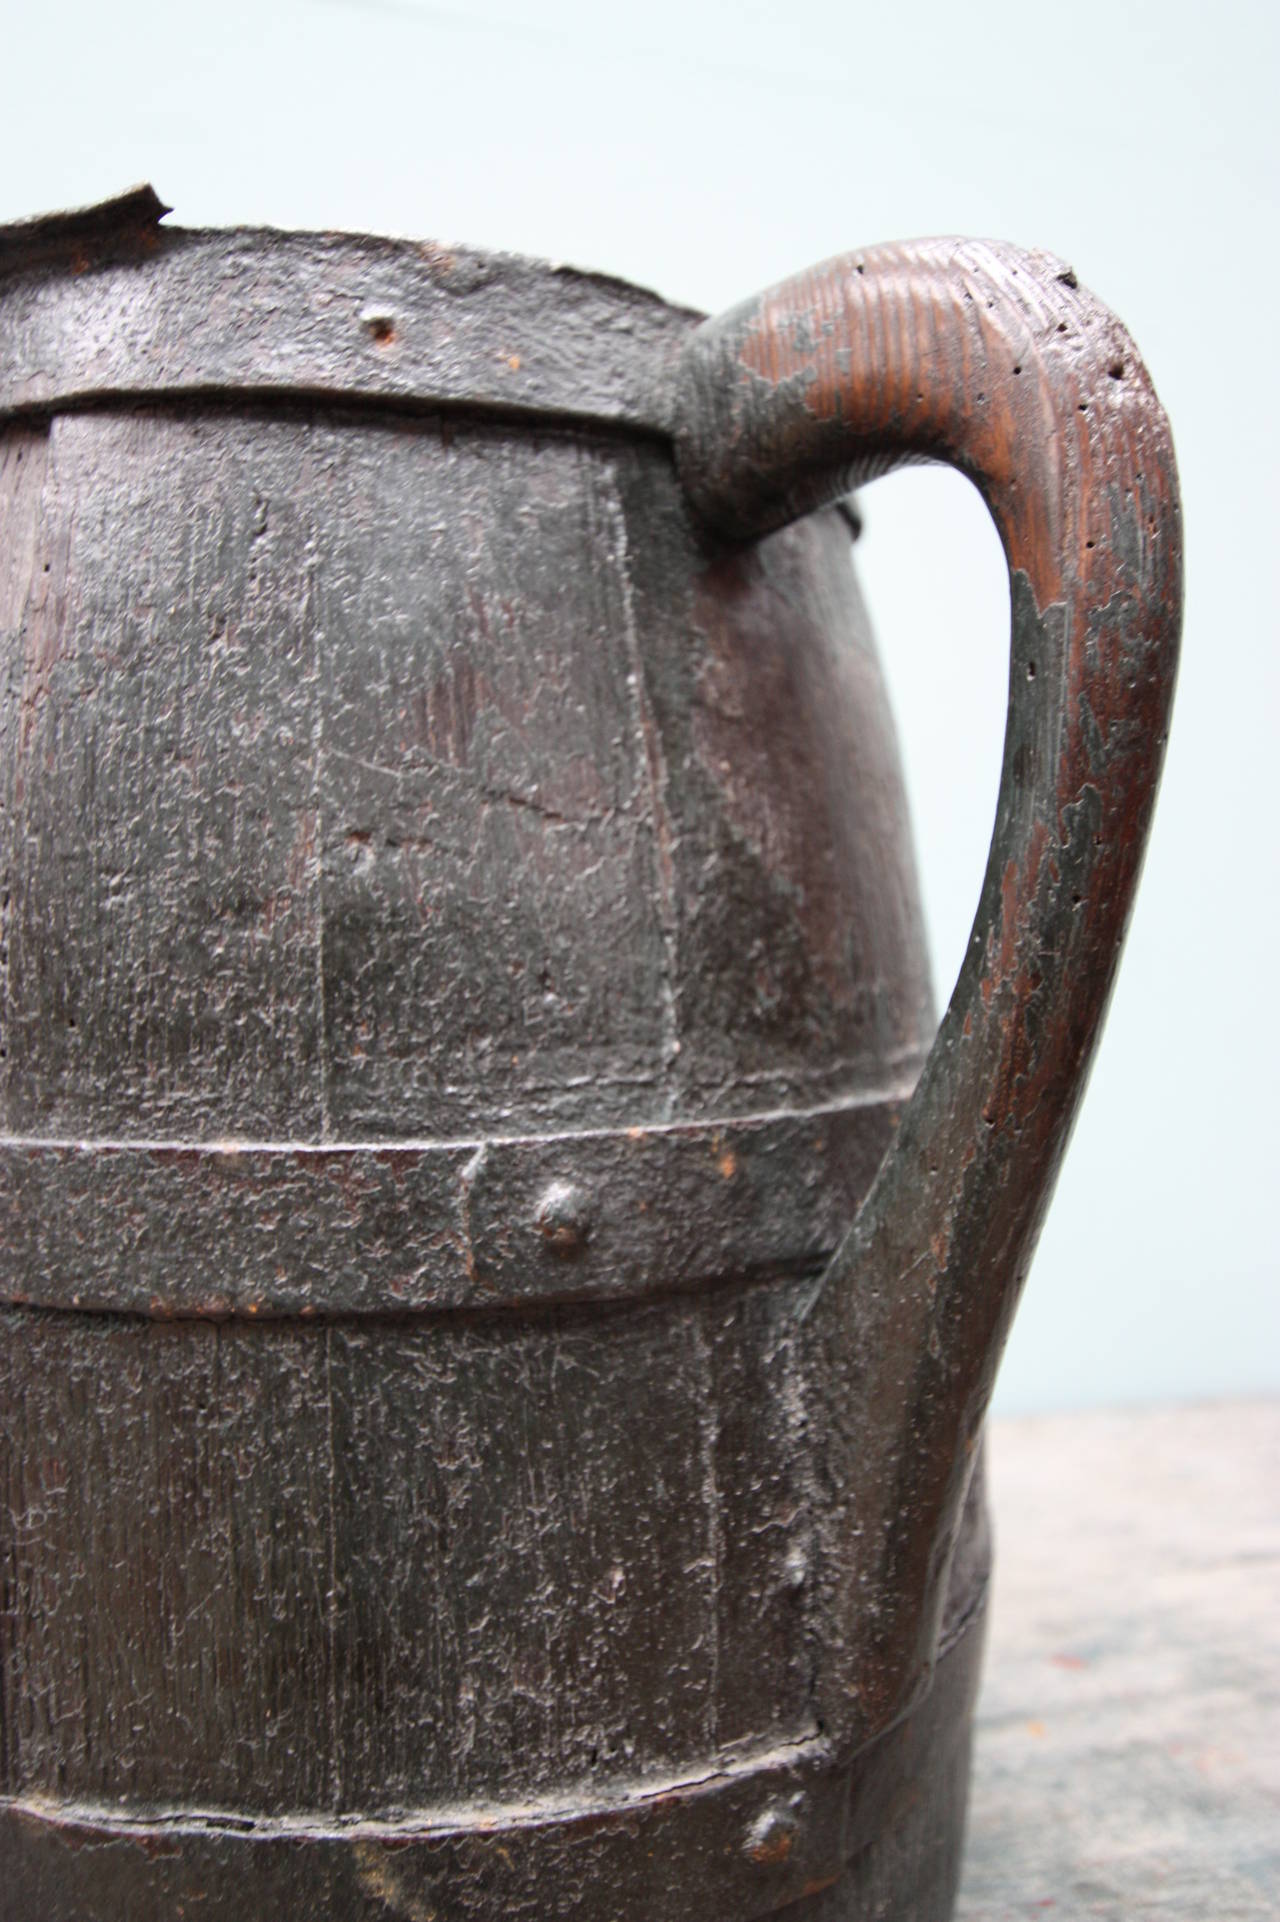 Wonderful 18th Century Antique Coopered Oak Jug.
This large, Georgian antique oak jug is made in coopered oak which is bound with metal straps.
Complete with the large carrying handle, this early 18th century antique has the original paint